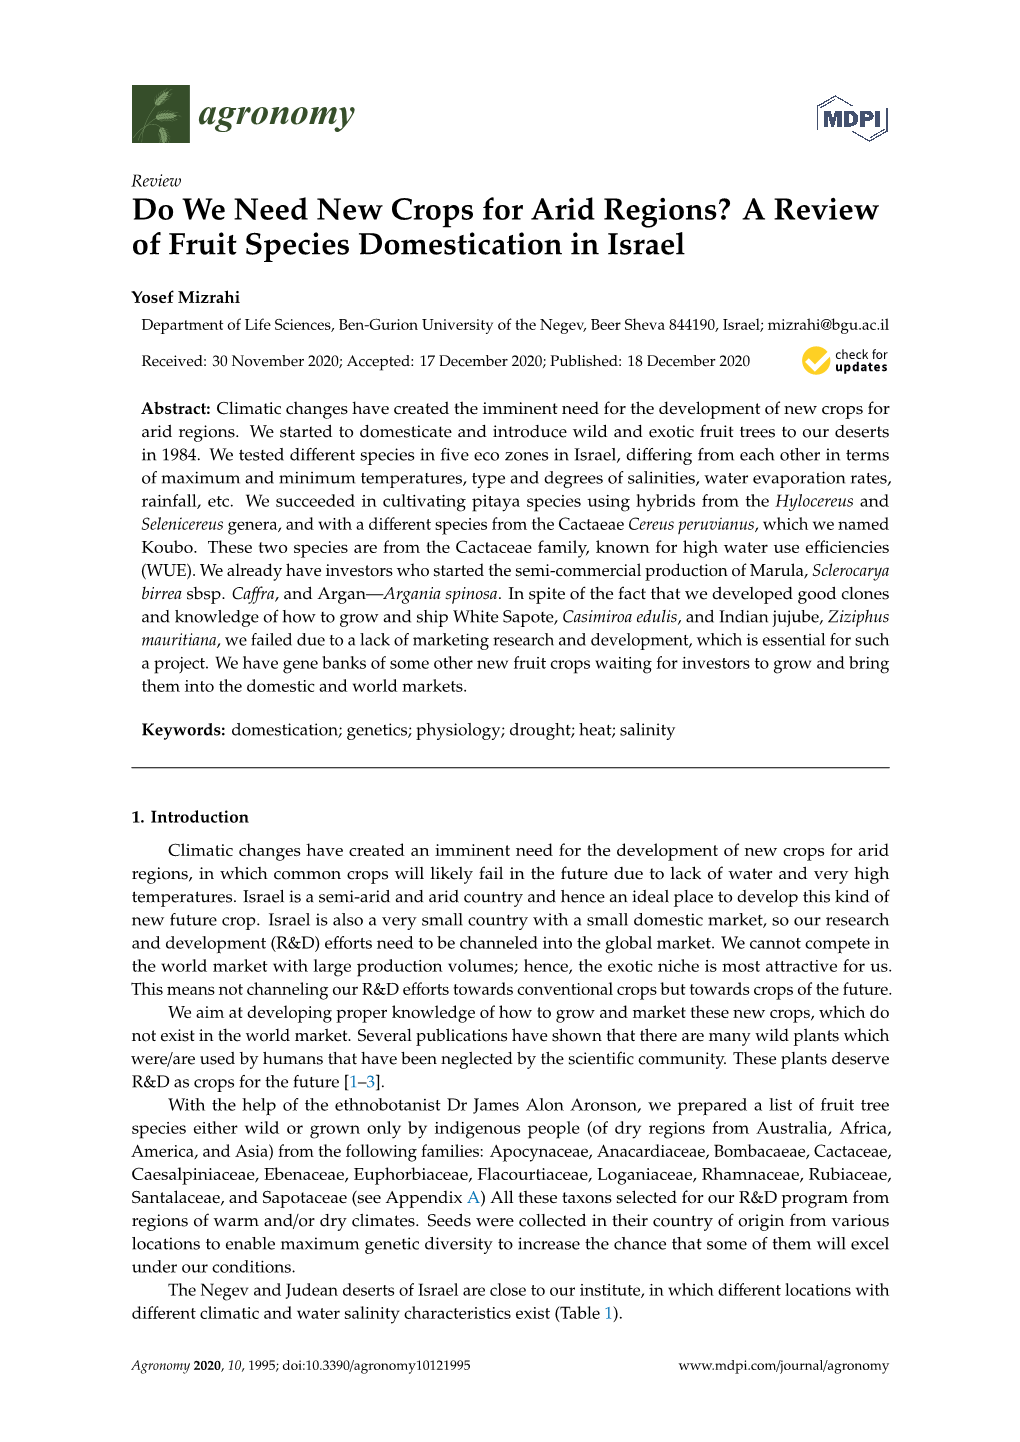 A Review of Fruit Species Domestication in Israel